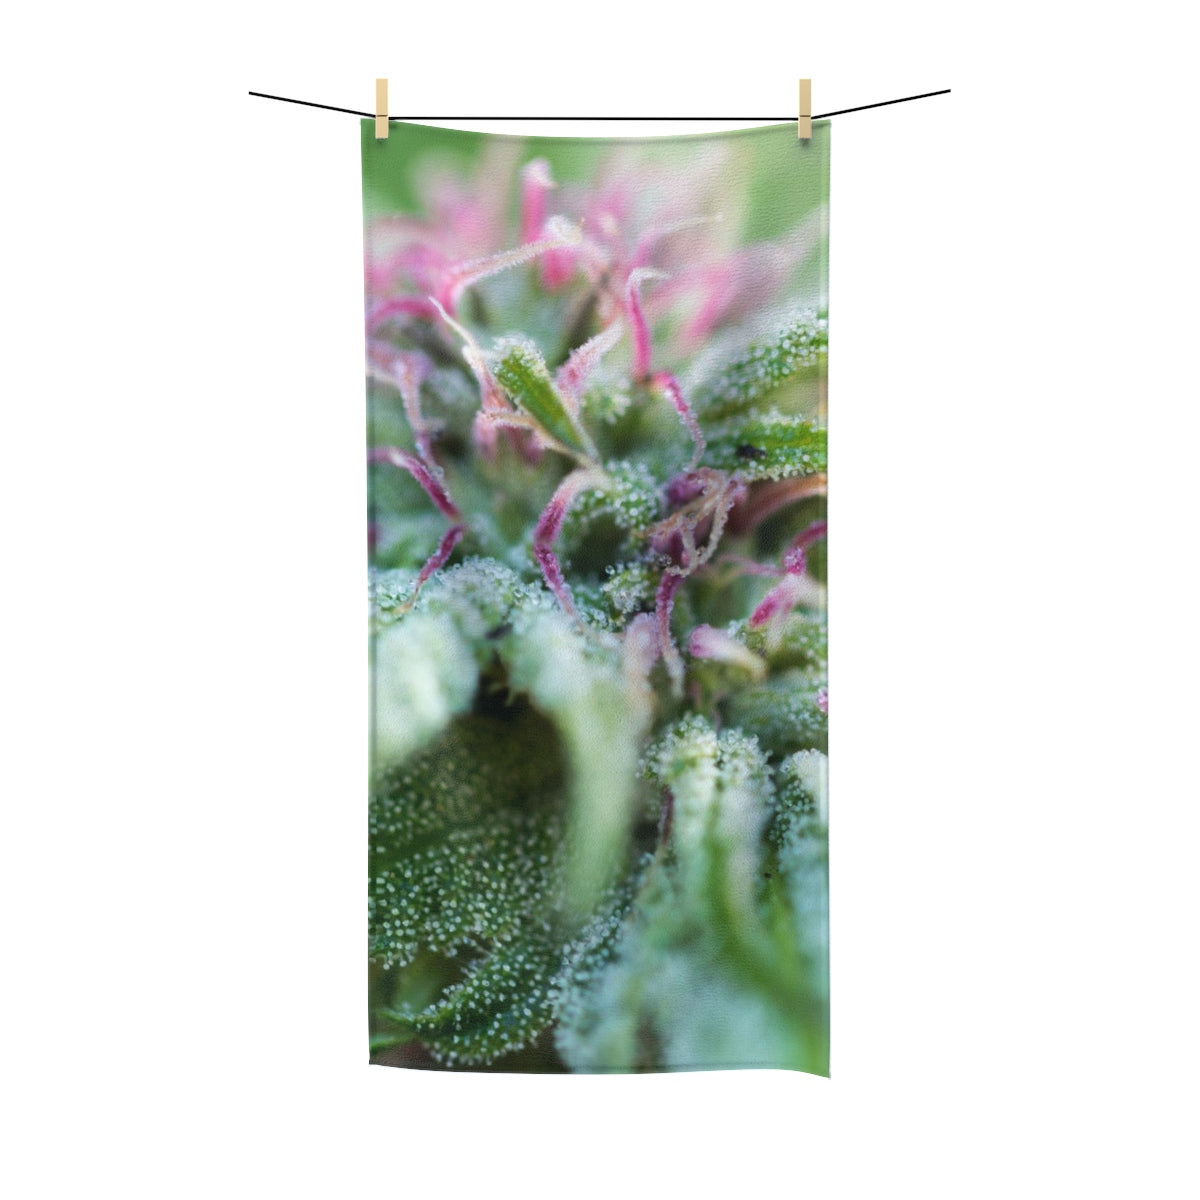 Blooming With Purple Cannabis Cannabis Custom Designed Towel.  A Unique Cannabis Gift For Friends & Family. Cannabis Decor For Your Home.